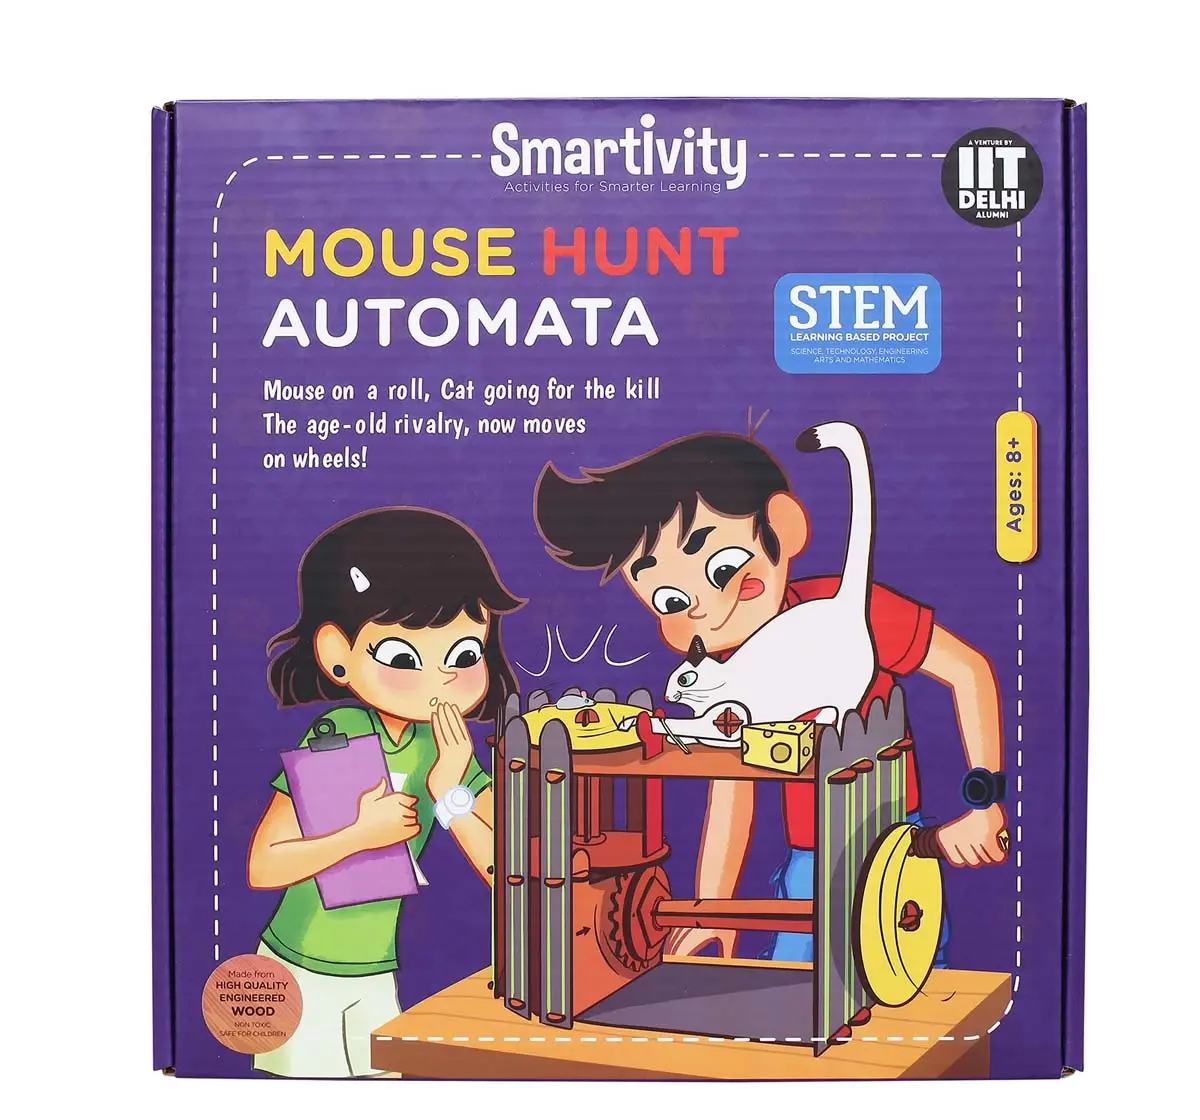 Smartivity Mouse Hunt Automata, Learning, Educational and Construction Activity Toy Gift (Multi-Color) for Kids age 8Y+ 